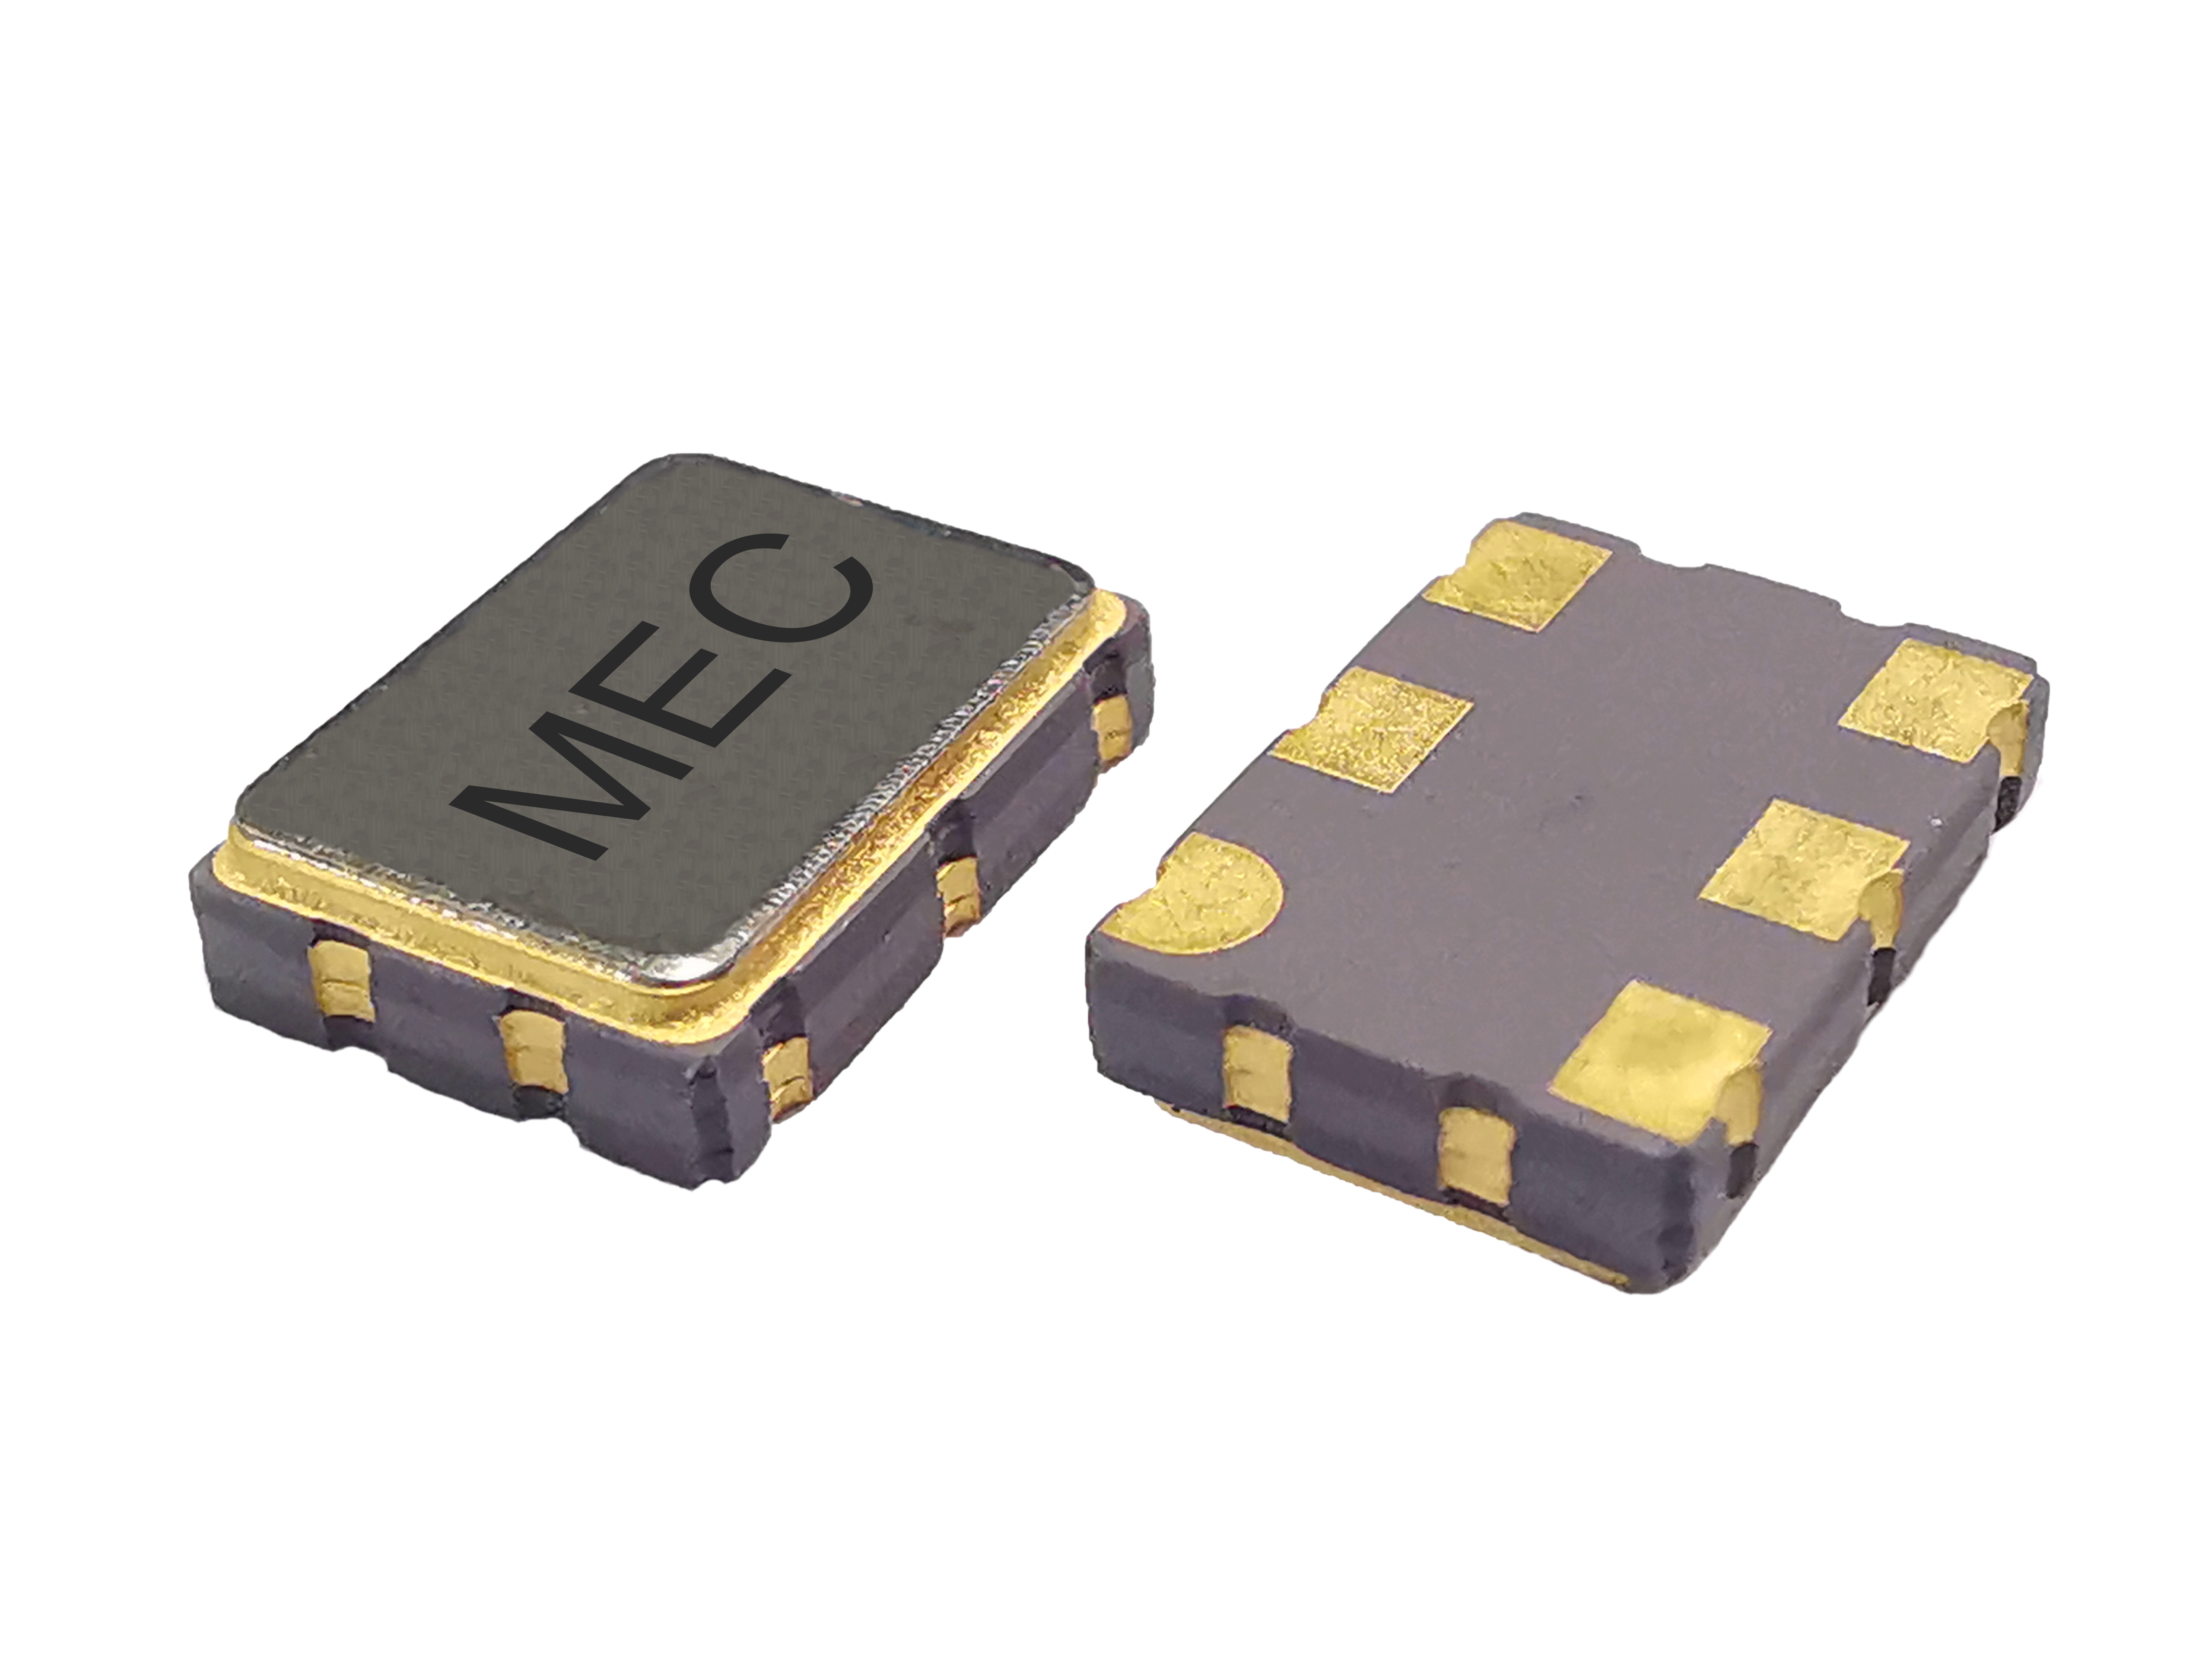 HCEK576 7050 2.5V Superb Phase Noise Differential With No PLL HCSL SMD Crystal Oscillator